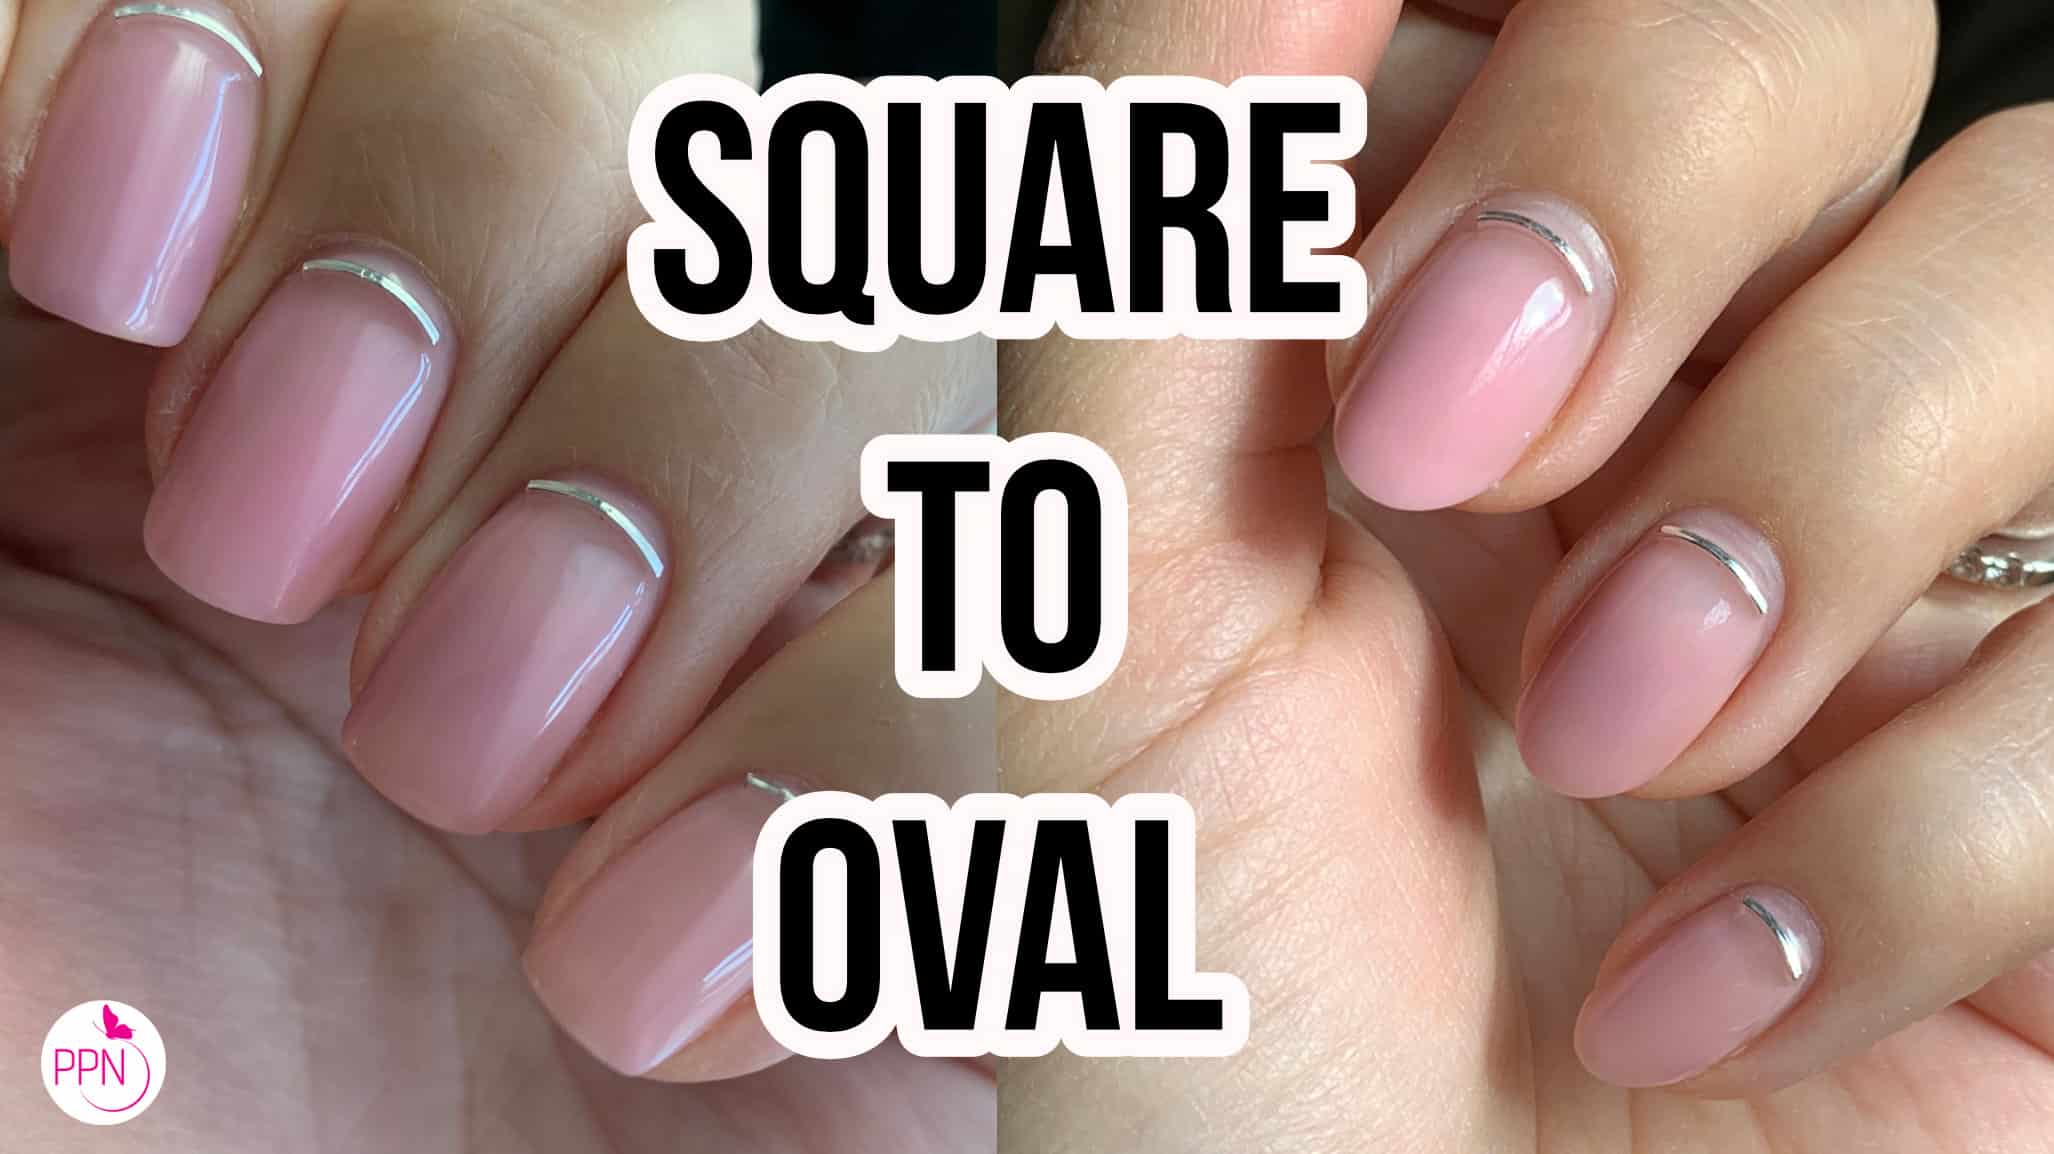 What do gel nails look like? - Quora